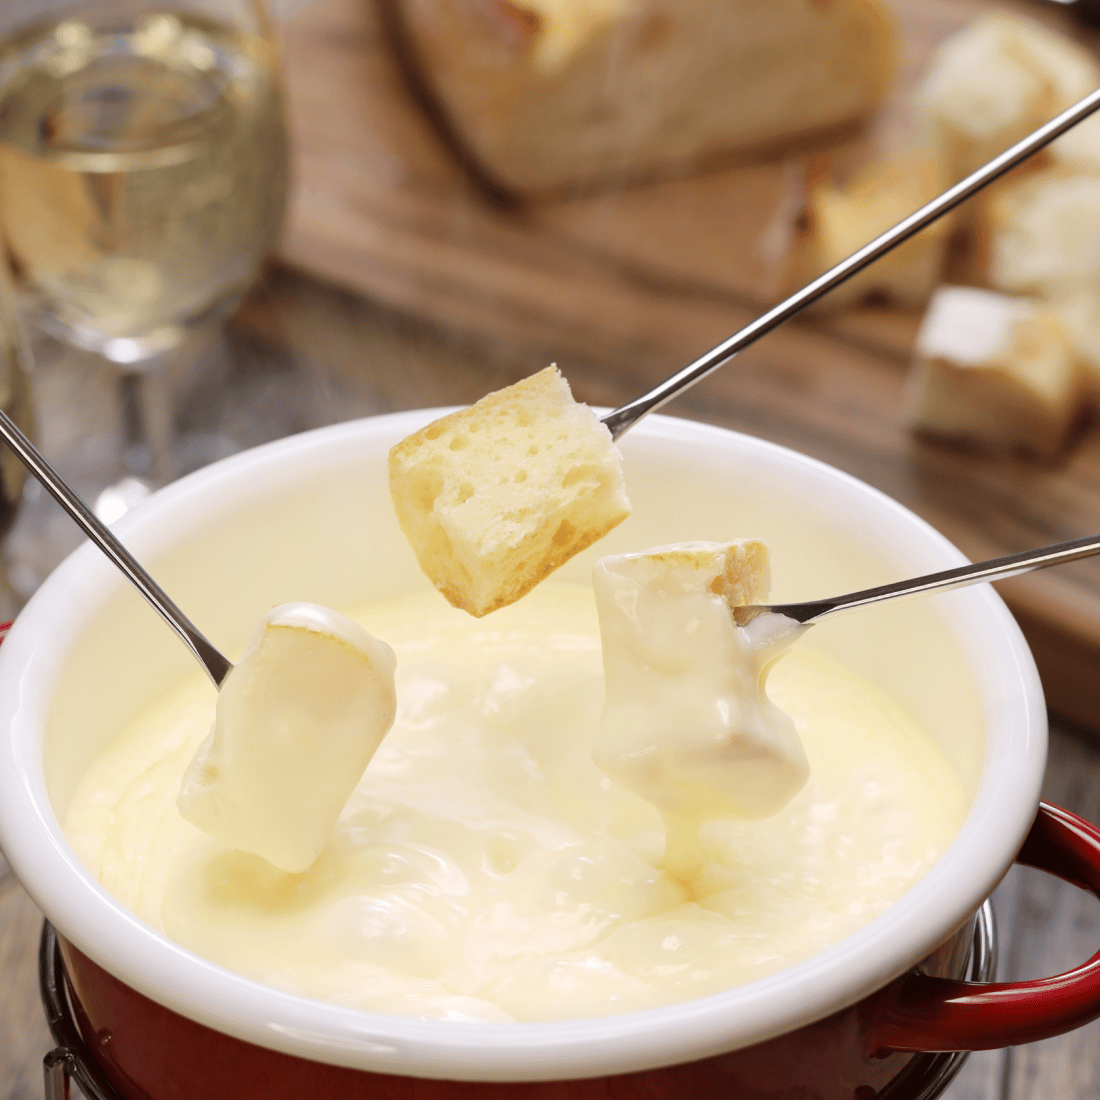 Cheese fondue in summer is a treat